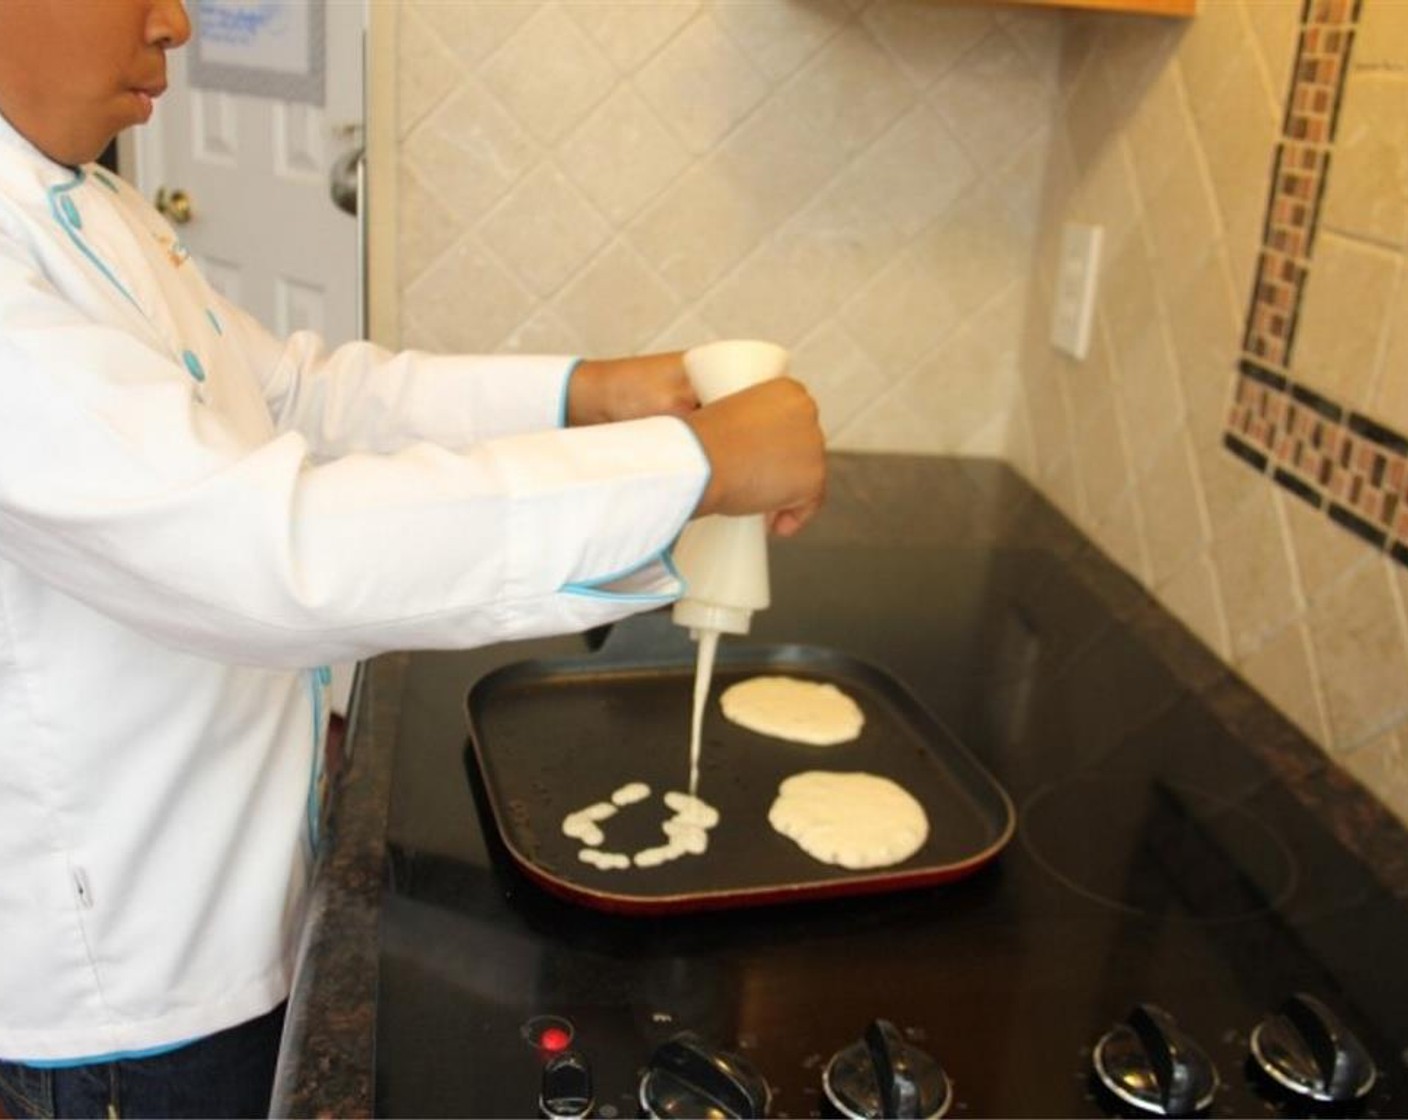 step 4 Spray a griddle or frying pan with cooking spray and add a small circle of pancake batter onto the hot pan.